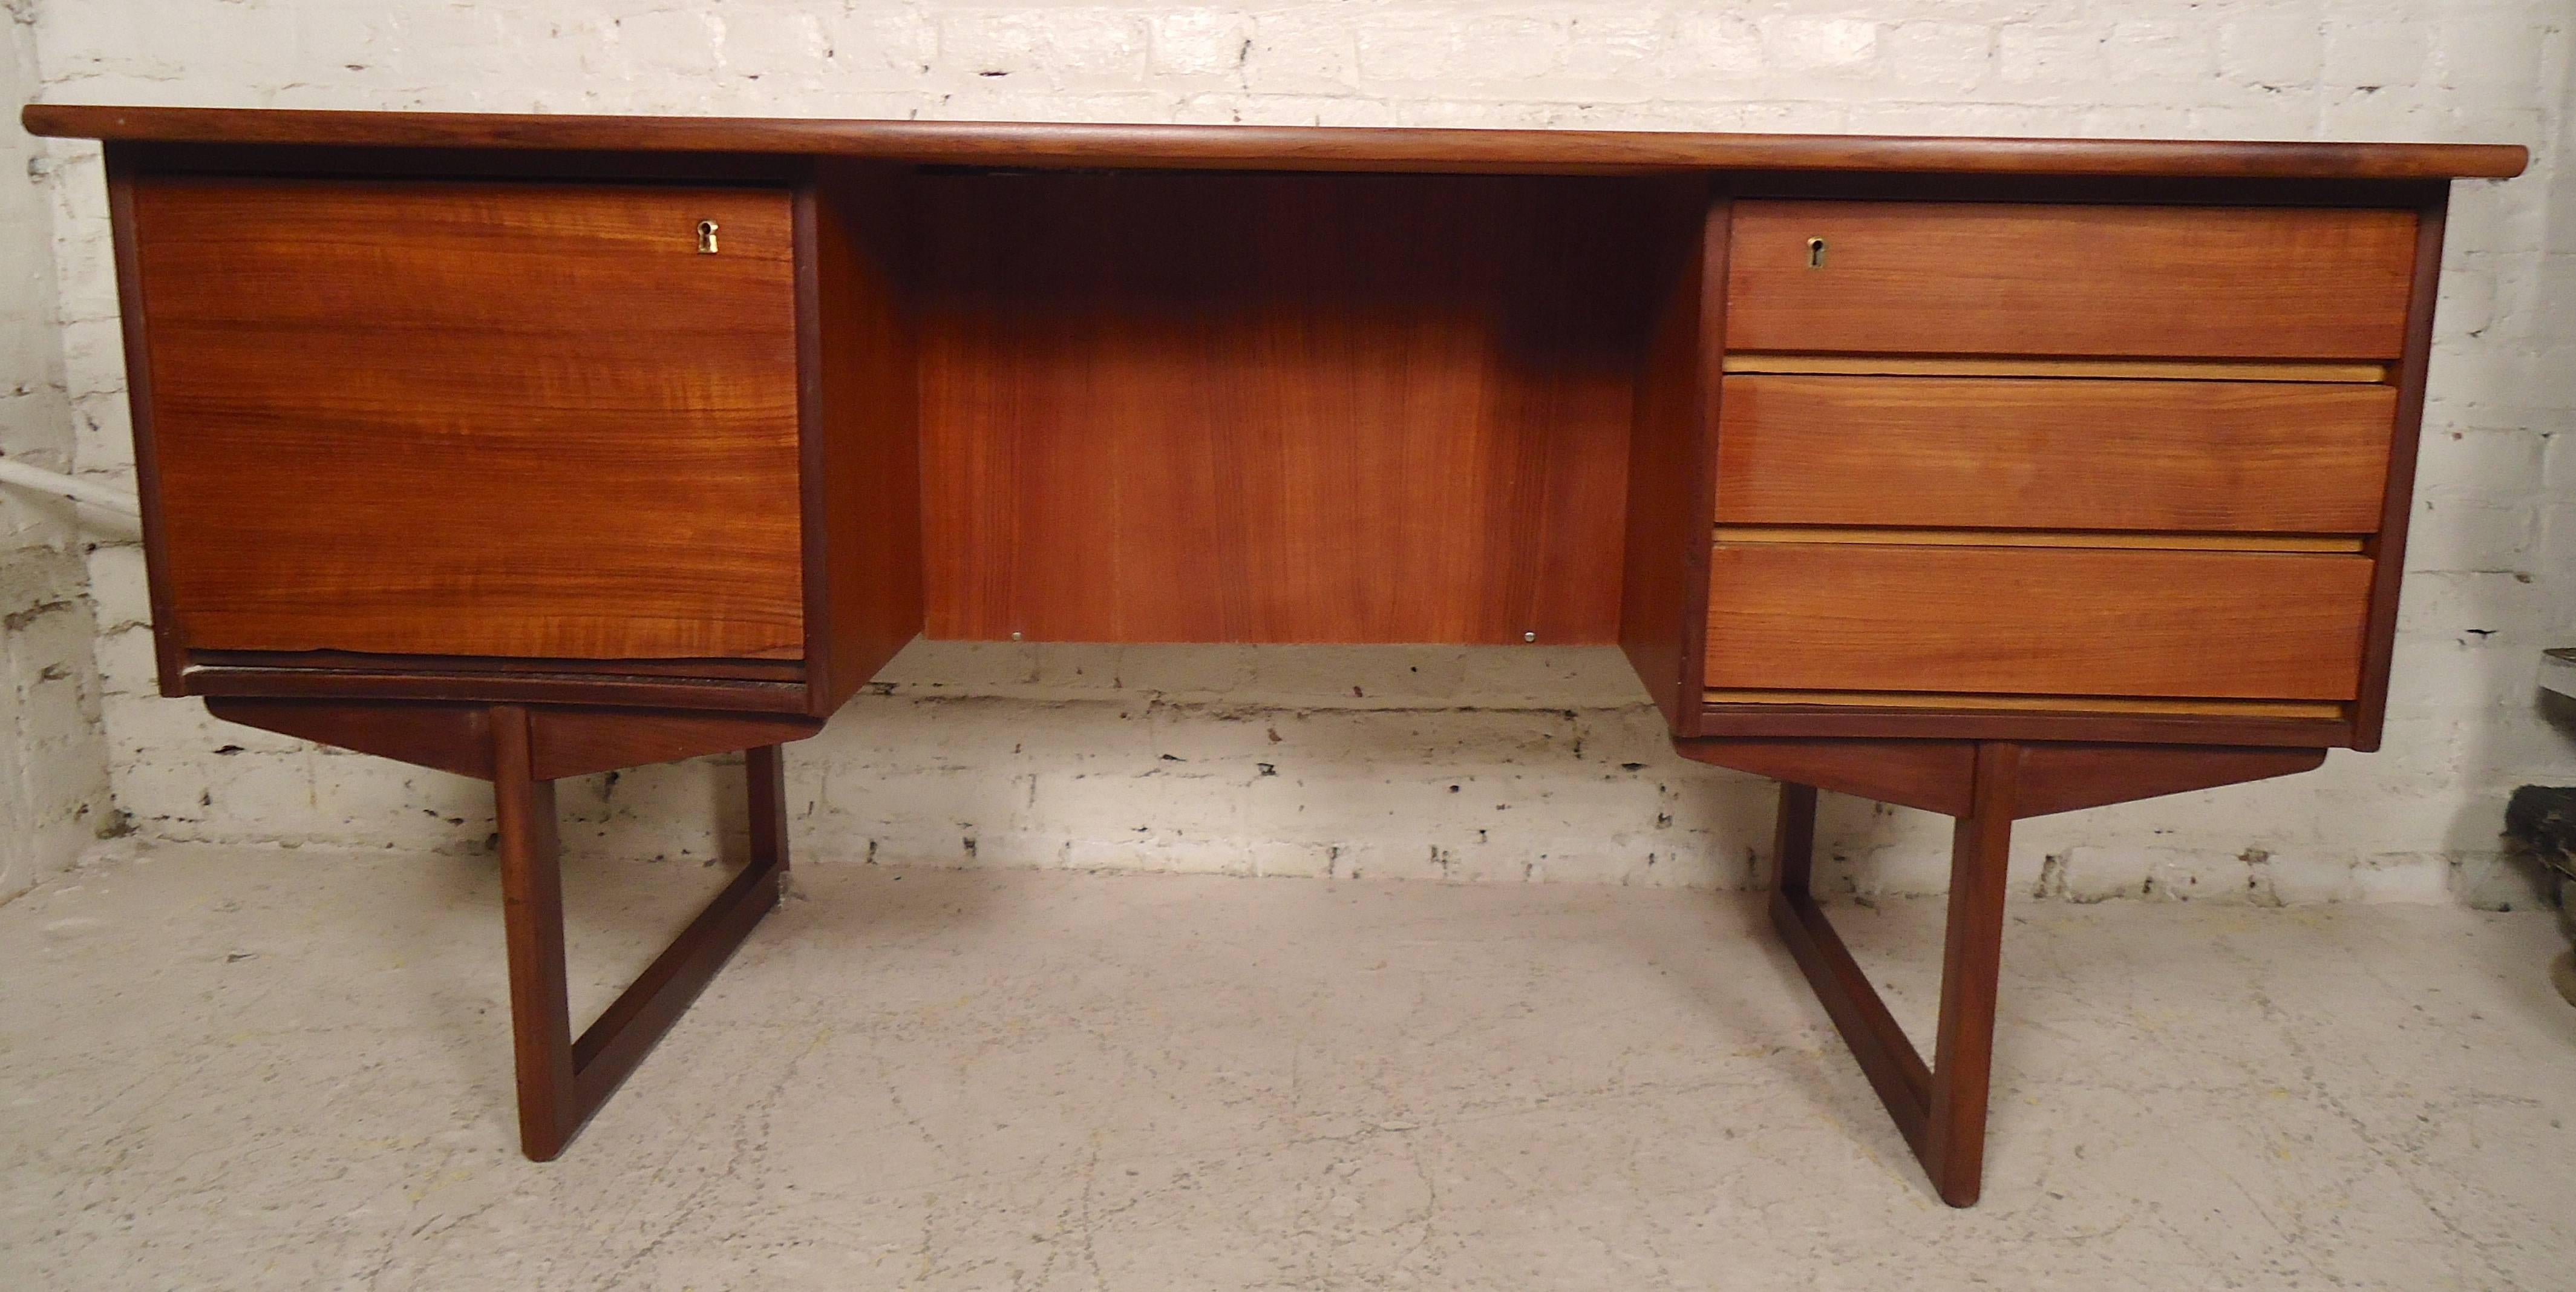 Danish desk with finished back and sled legs with warm teak grain. Three drawers with sculpted pulls, back storage and long desk top. Impressive double-sided design offers additional shelf storage/display along with the spacious filing cabinet and